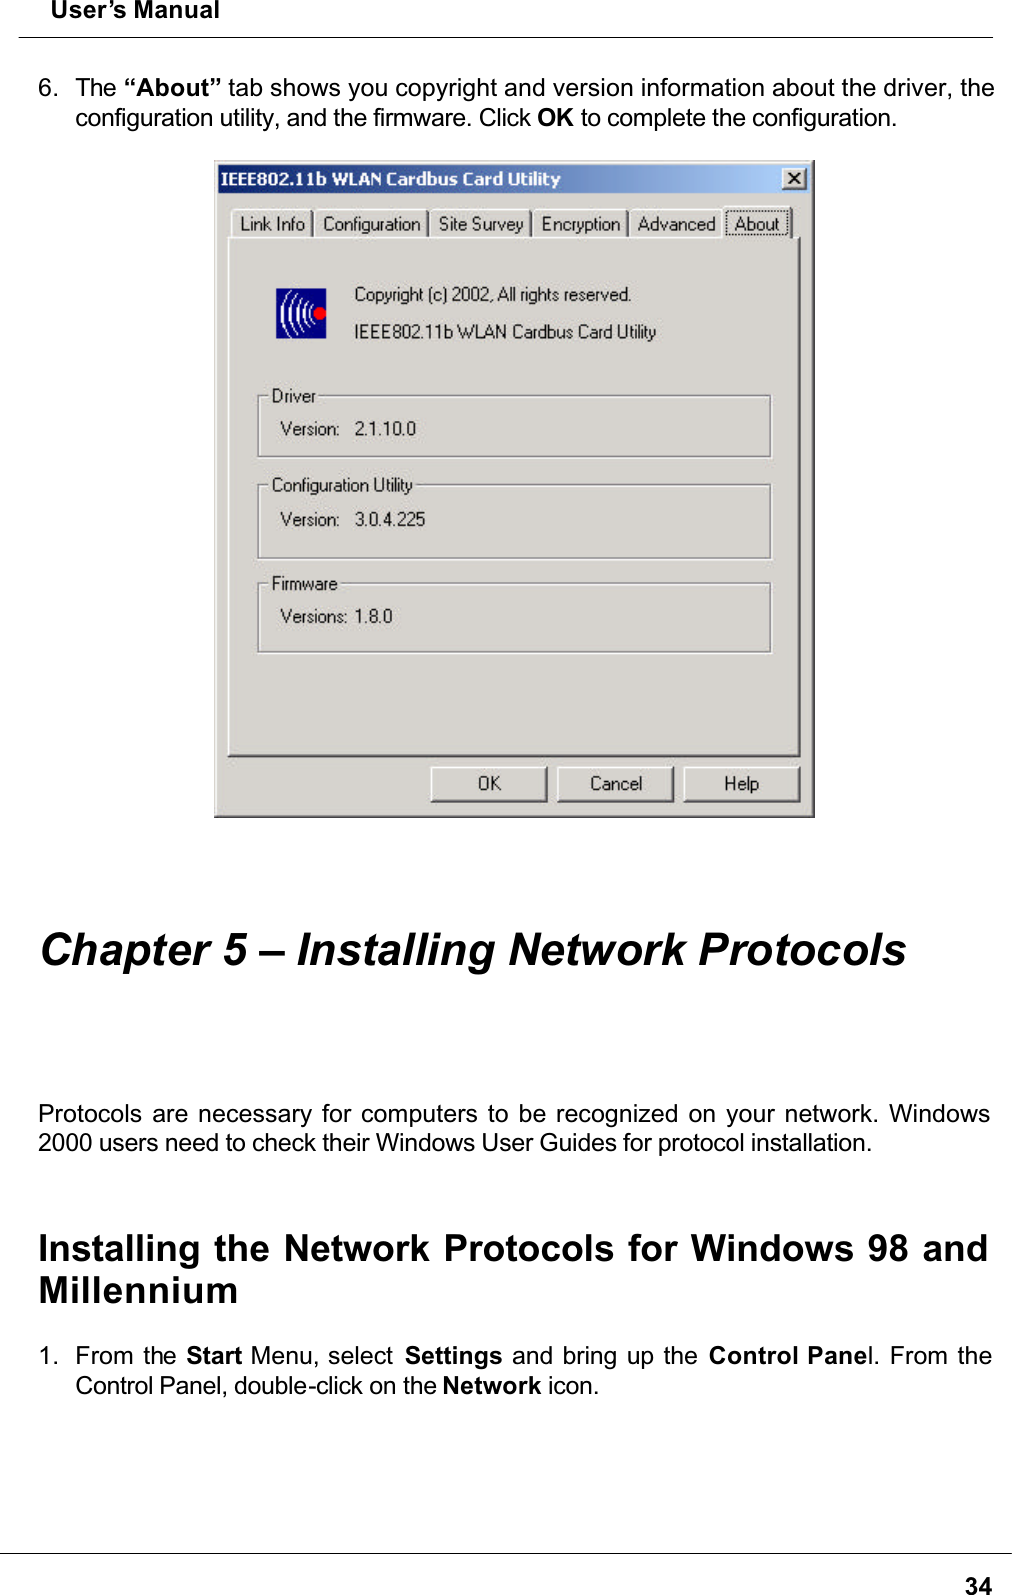  User’s Manual346. The “About” tab shows you copyright and version information about the driver, the configuration utility, and the firmware. Click OK to complete the configuration.Chapter 5 – Installing Network ProtocolsProtocols are necessary for computers to be recognized on your network. Windows 2000 users need to check their Windows User Guides for protocol installation.Installing the Network Protocols for Windows 98 and Millennium1. From the Start Menu, select  Settings and bring up the Control Panel. From the Control Panel, double-click on the Network icon.